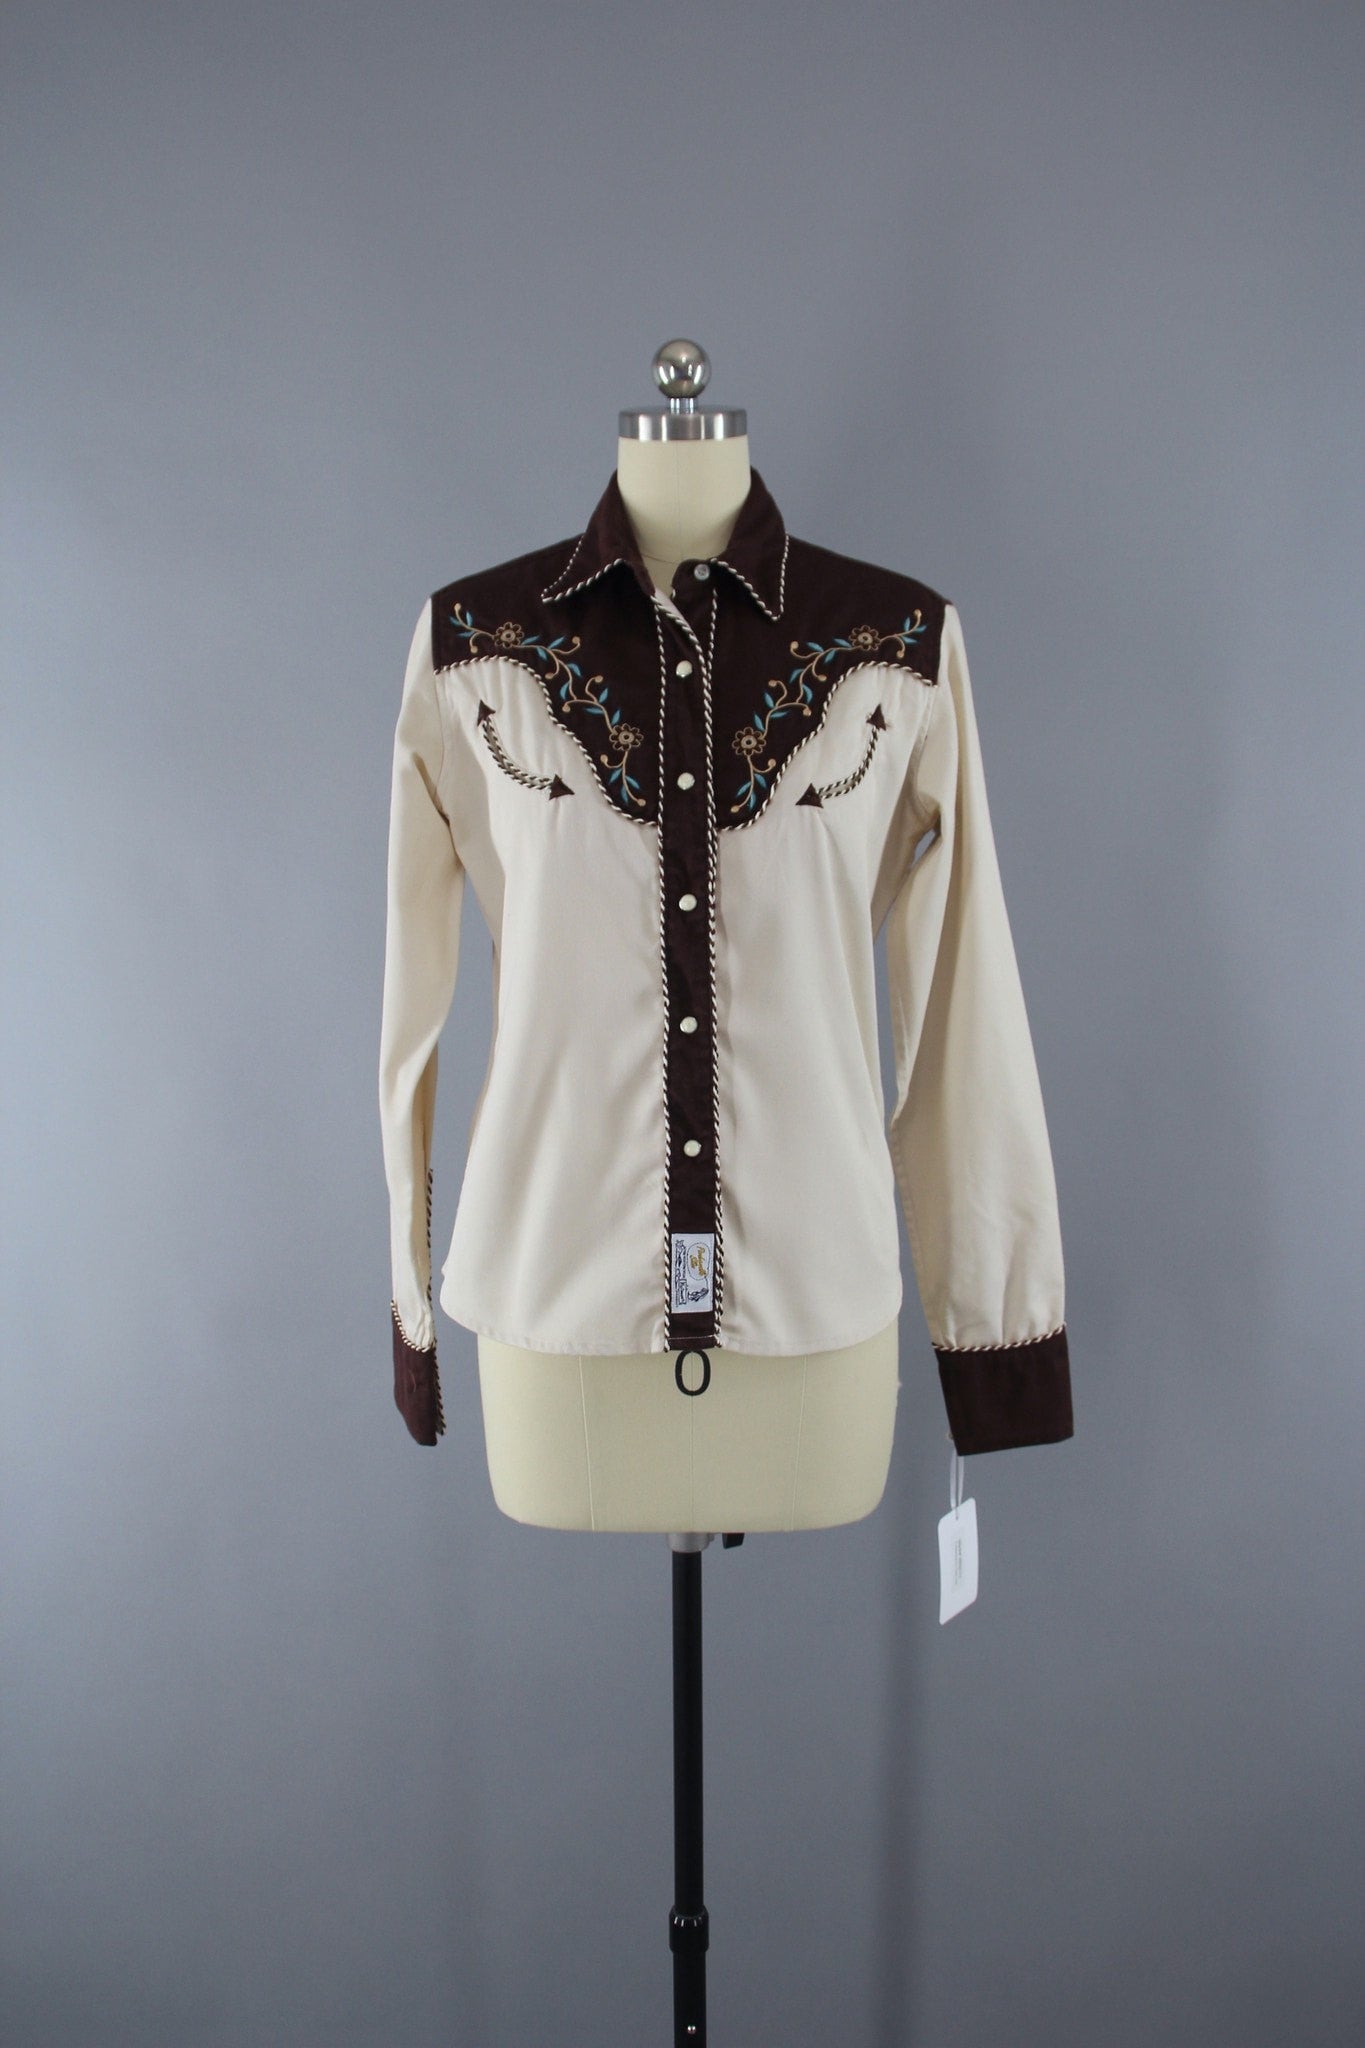 Vintage 1980s Panhandle Slim Western Shirt with Brown & Aqua Embroidery - ThisBlueBird